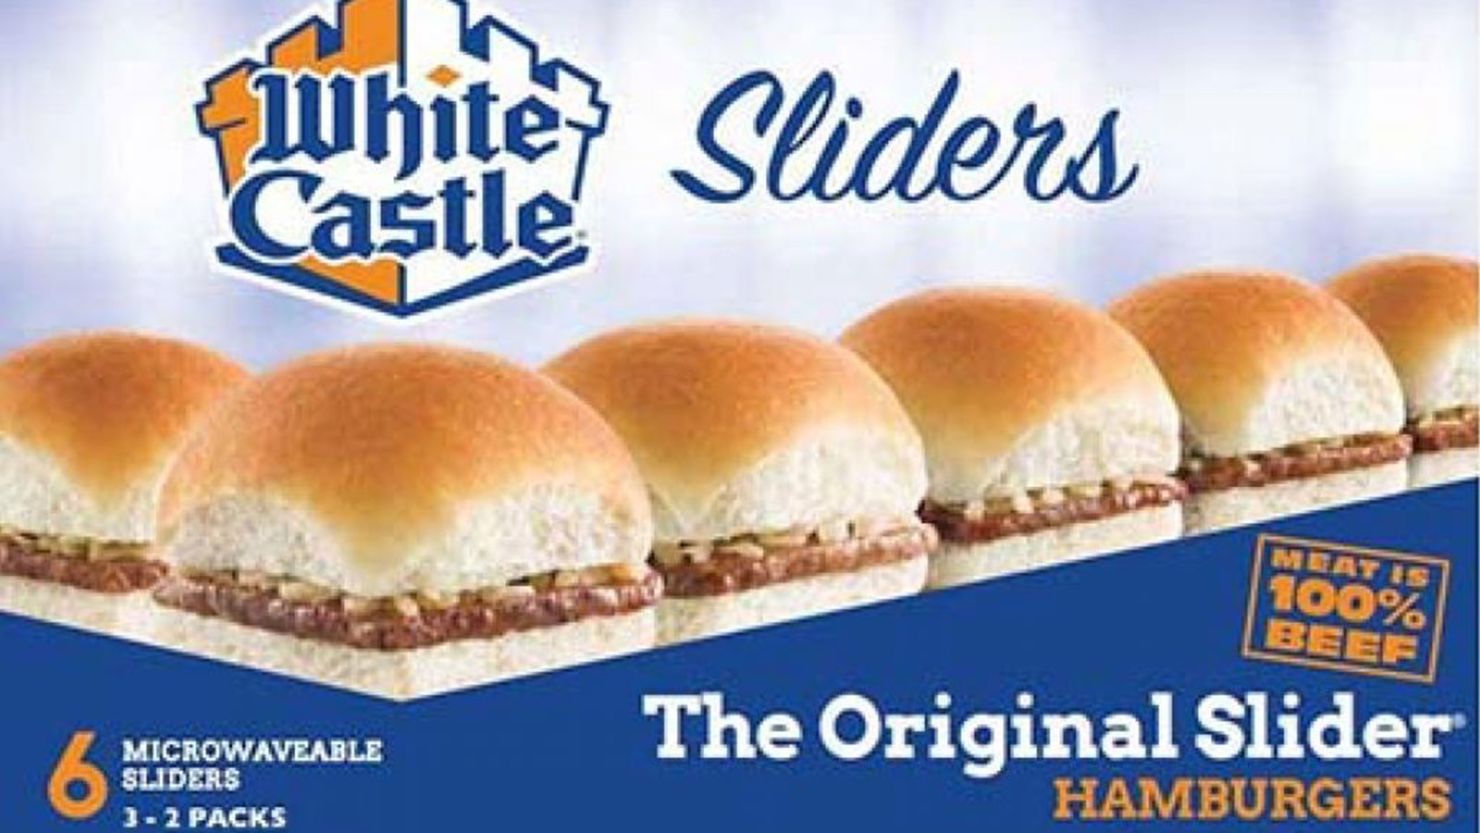 White Castle products at select stores are being recalled for possible Listeria monocytogenes.